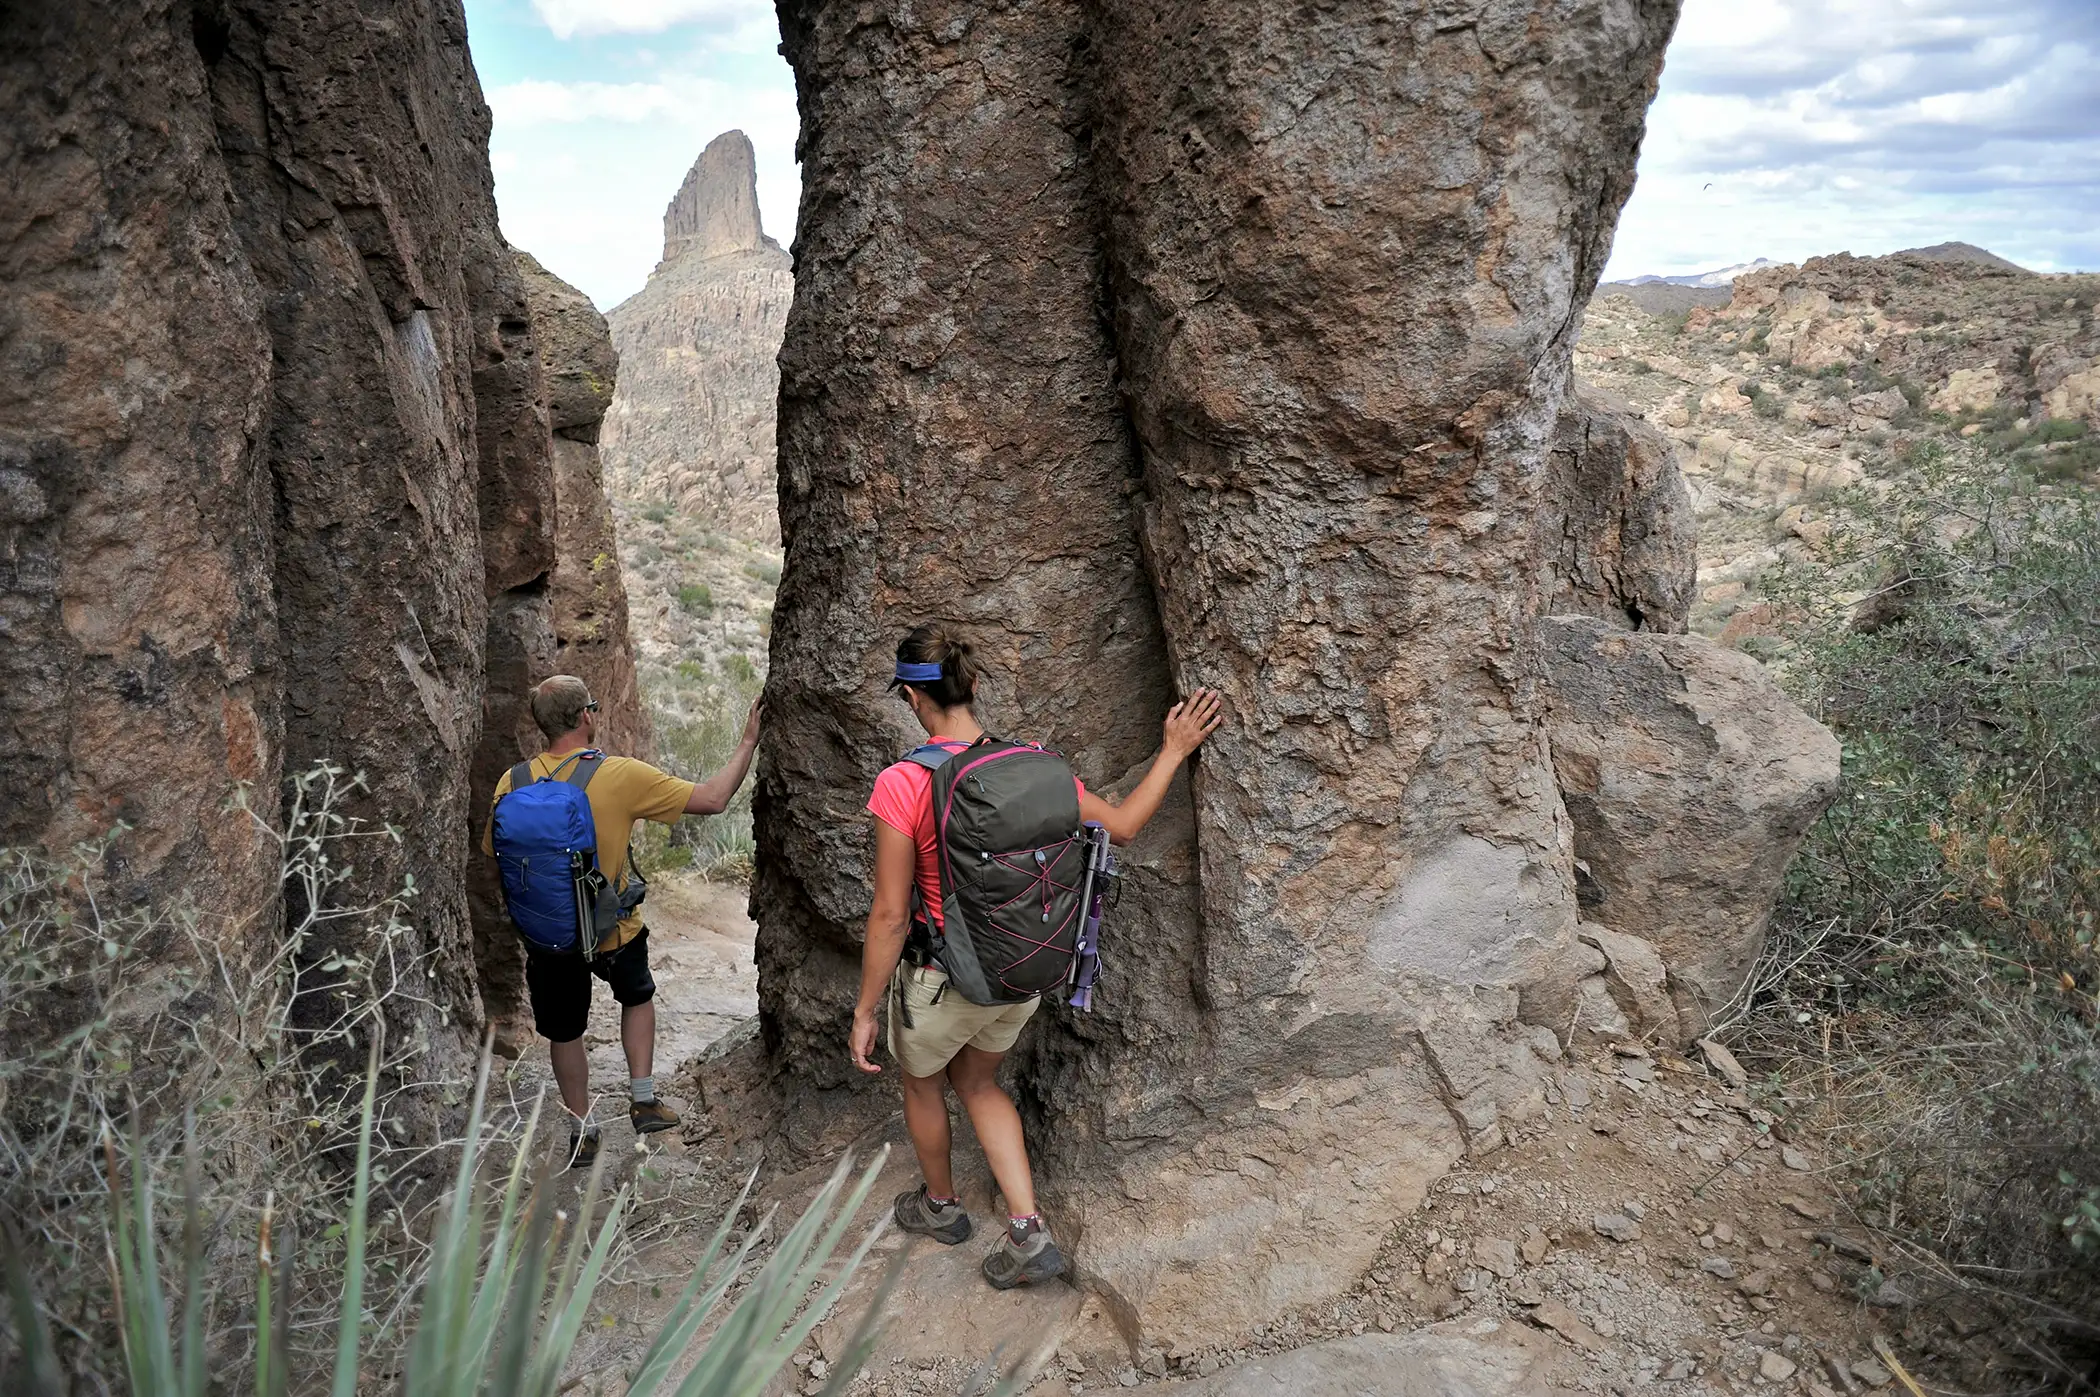 Hikers on the Fremont Saddle on the popular Peralta Trail in the Superstition Wilderness Area, Tonto National Forest near Mesa, Arizona